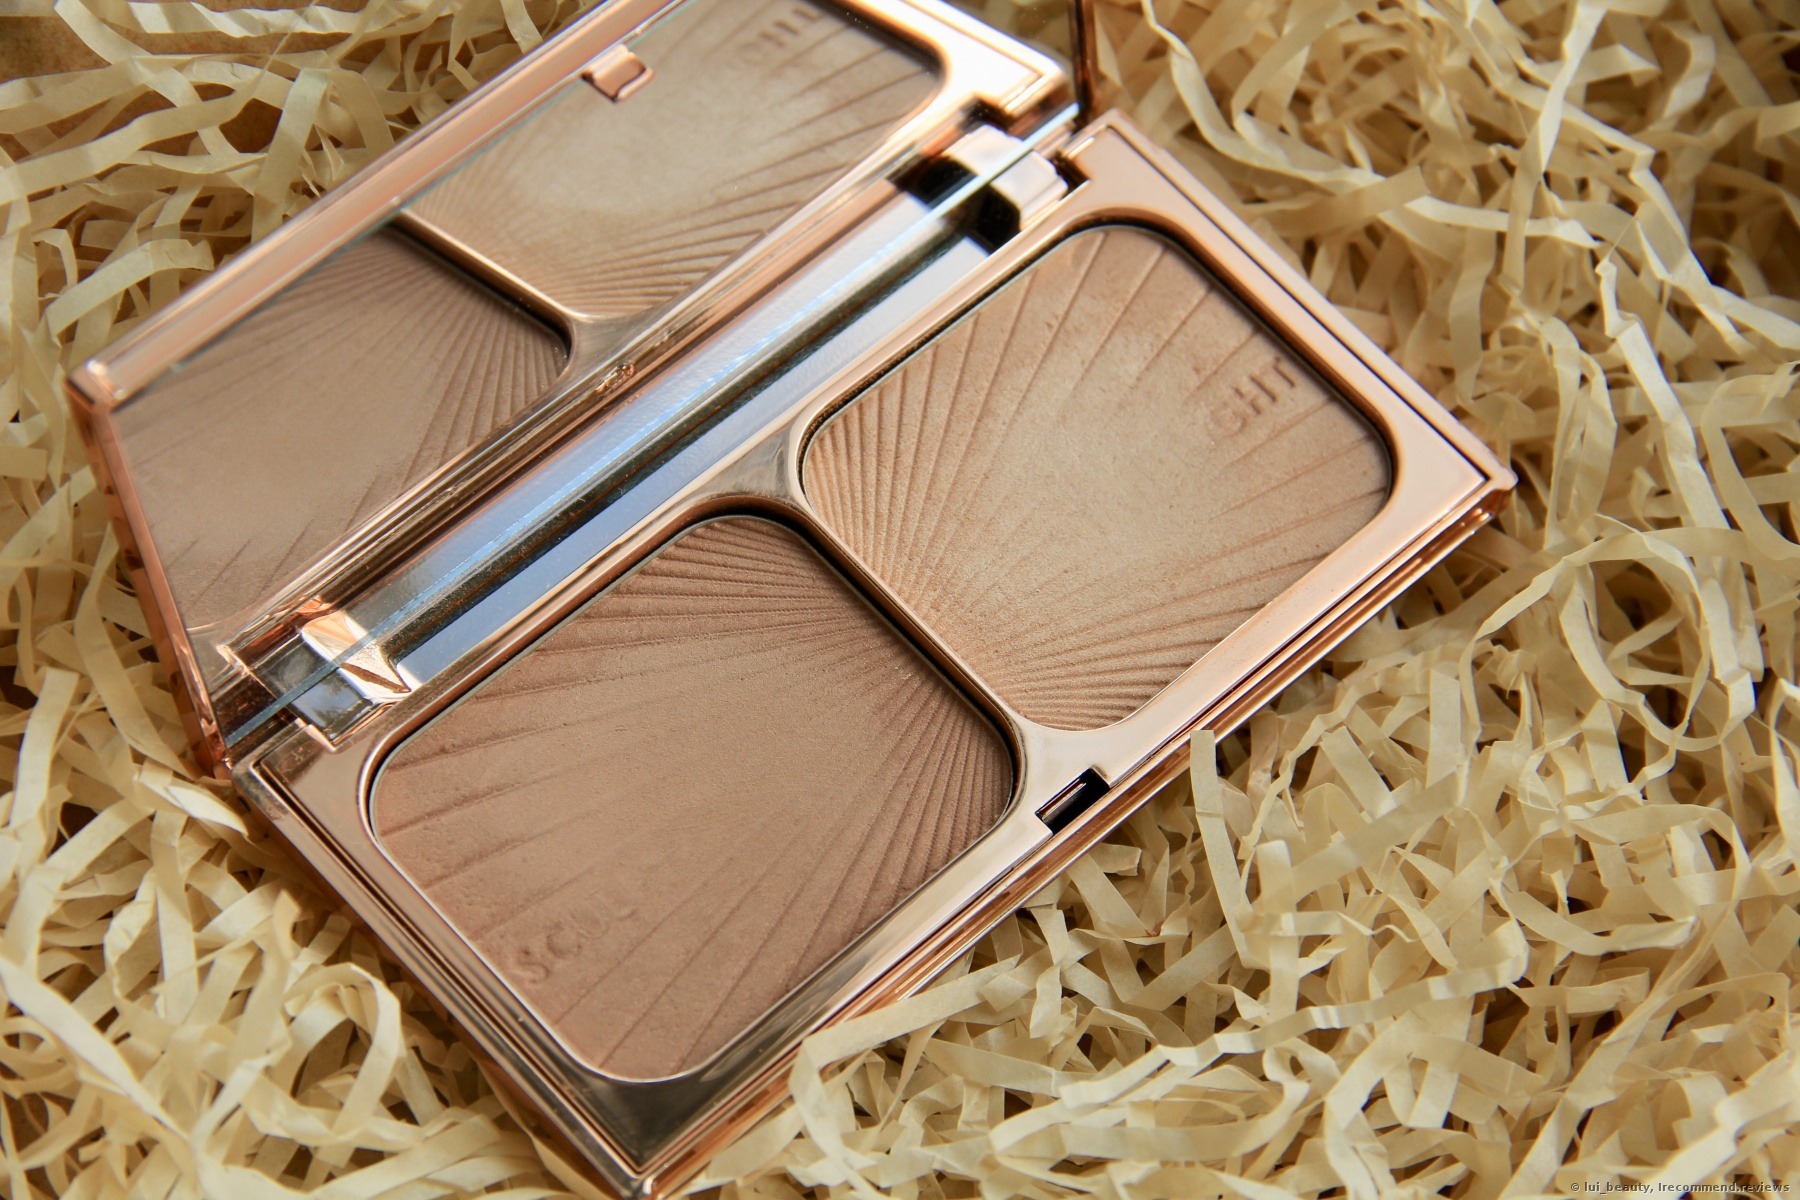 Charlotte Tilbury Filmstar Bronze & Glow Palette - «Hollywood contouring from Charlotte Tilbury. Legendary Filmstar Bronze & Glow palette costs big bucks! » | Consumer reviews